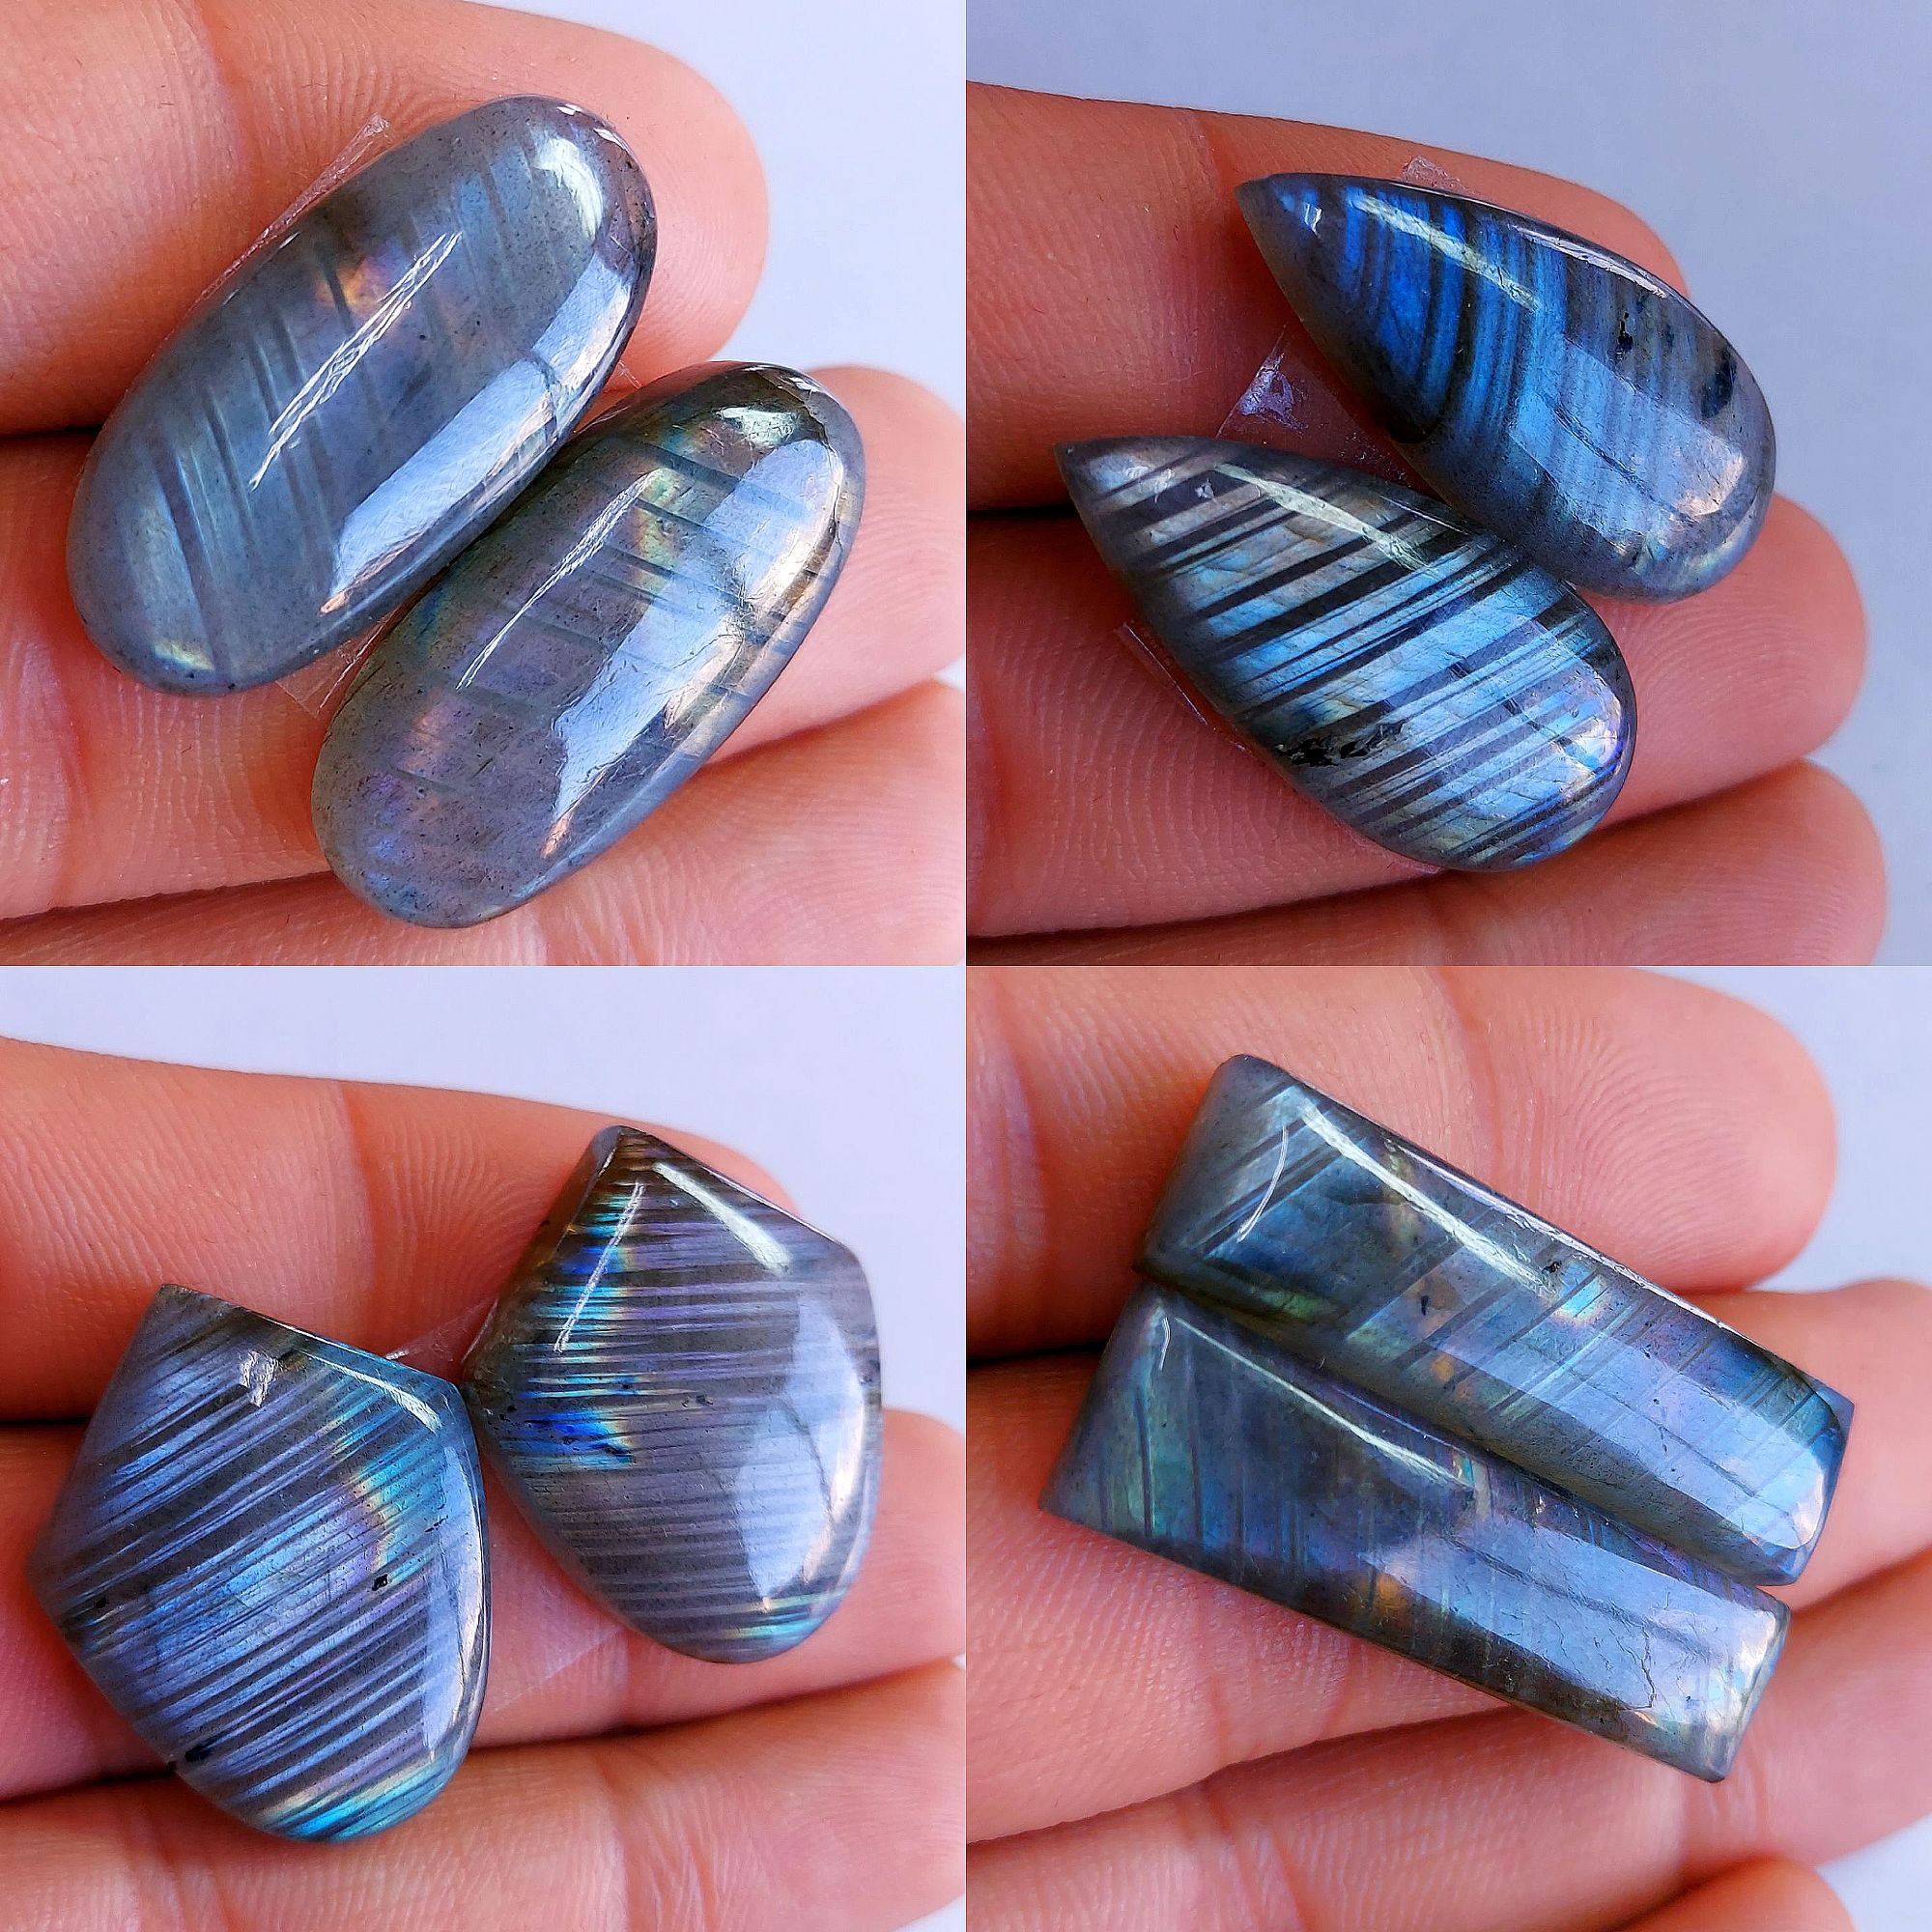 4 Pairs lot 170Cts Natural Labradorite cabochon pair lot for jewelry making loose gemstone lot mix shape and size earring pairs 31x8 25x11mm